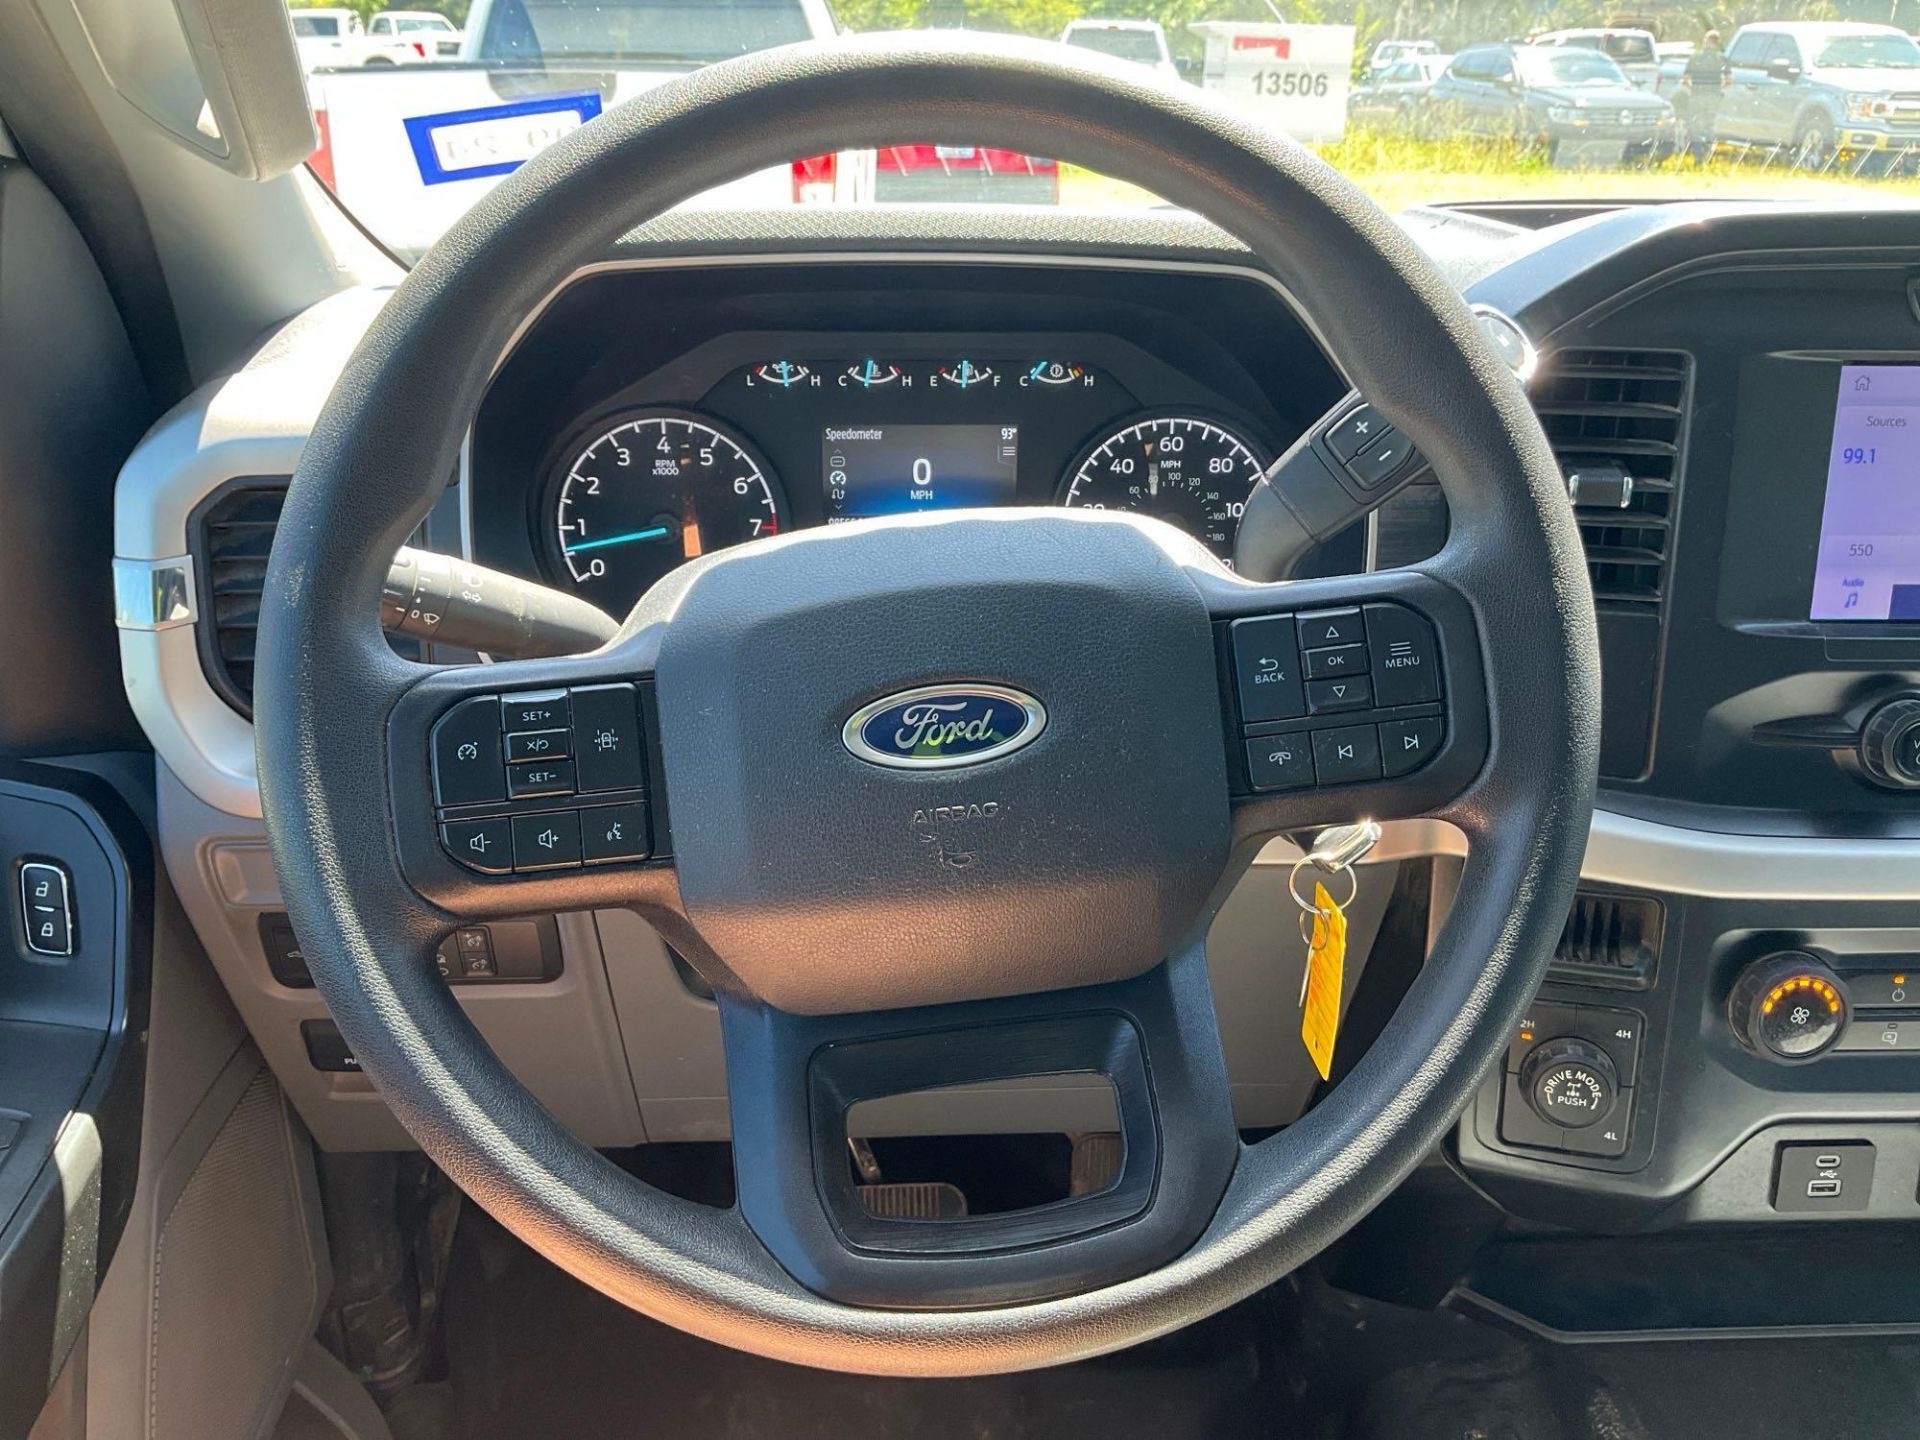 2021FORD F-150 XL PICKUP TRUCK, GAS POWER AUTOMATIC, APPROX GVWR7050, 4X4, POWER LOCKS & WINDOWS , - Image 15 of 22